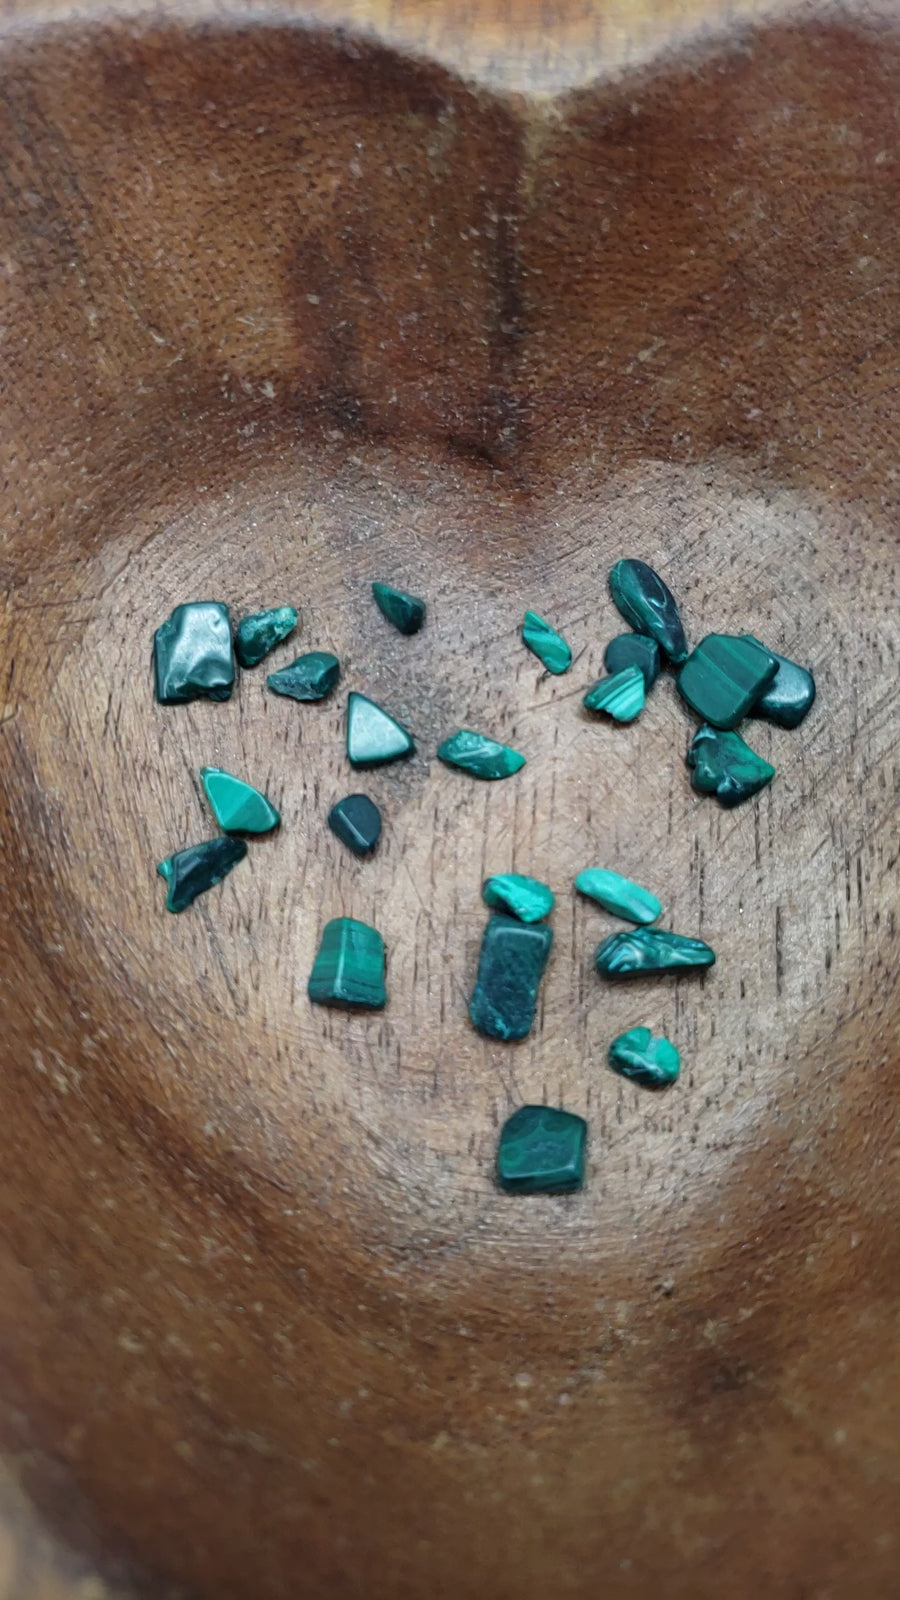 malachite crystal chips being poured into bowl